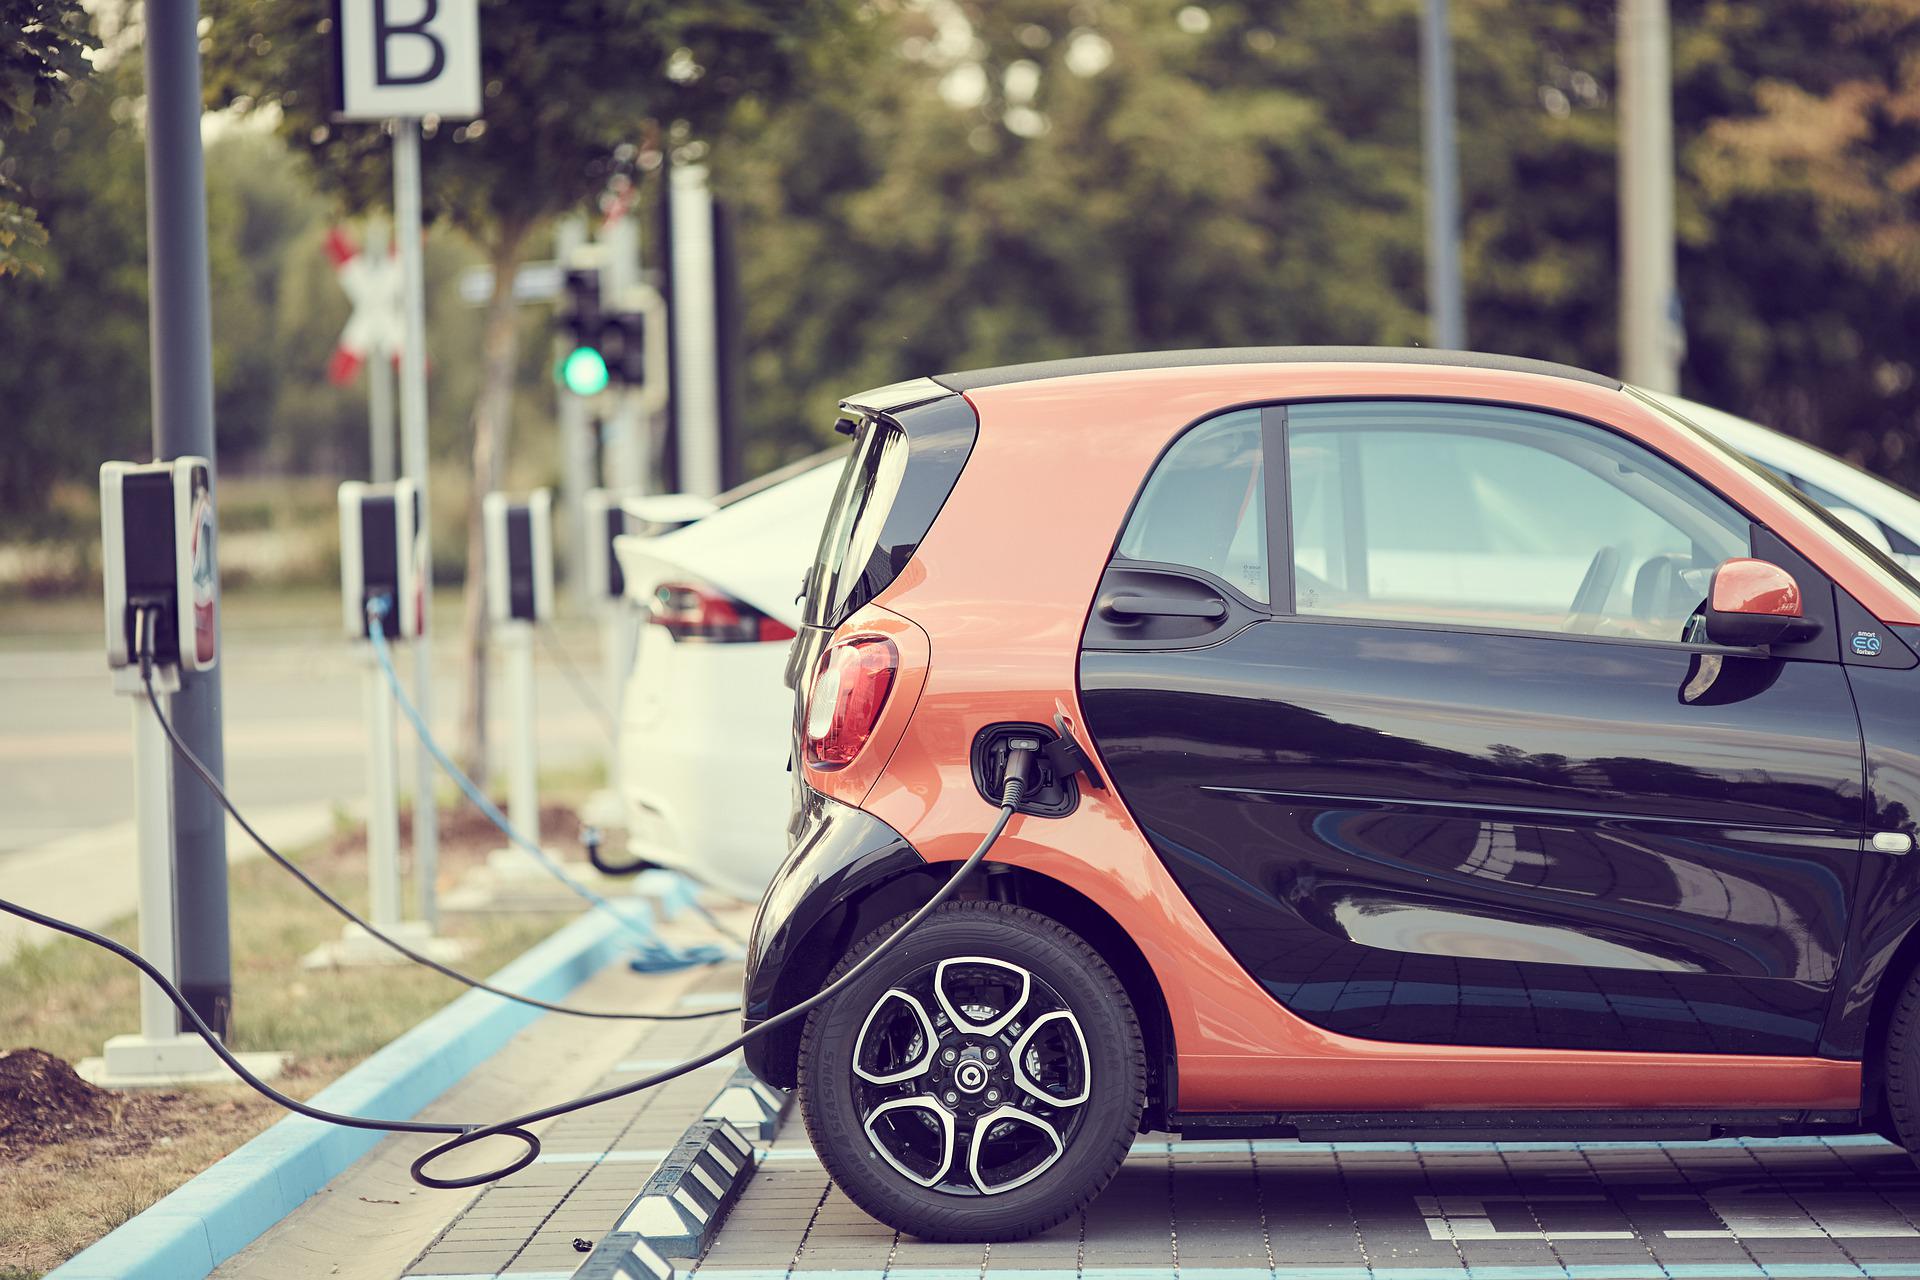 Are electric cars better for the environment?